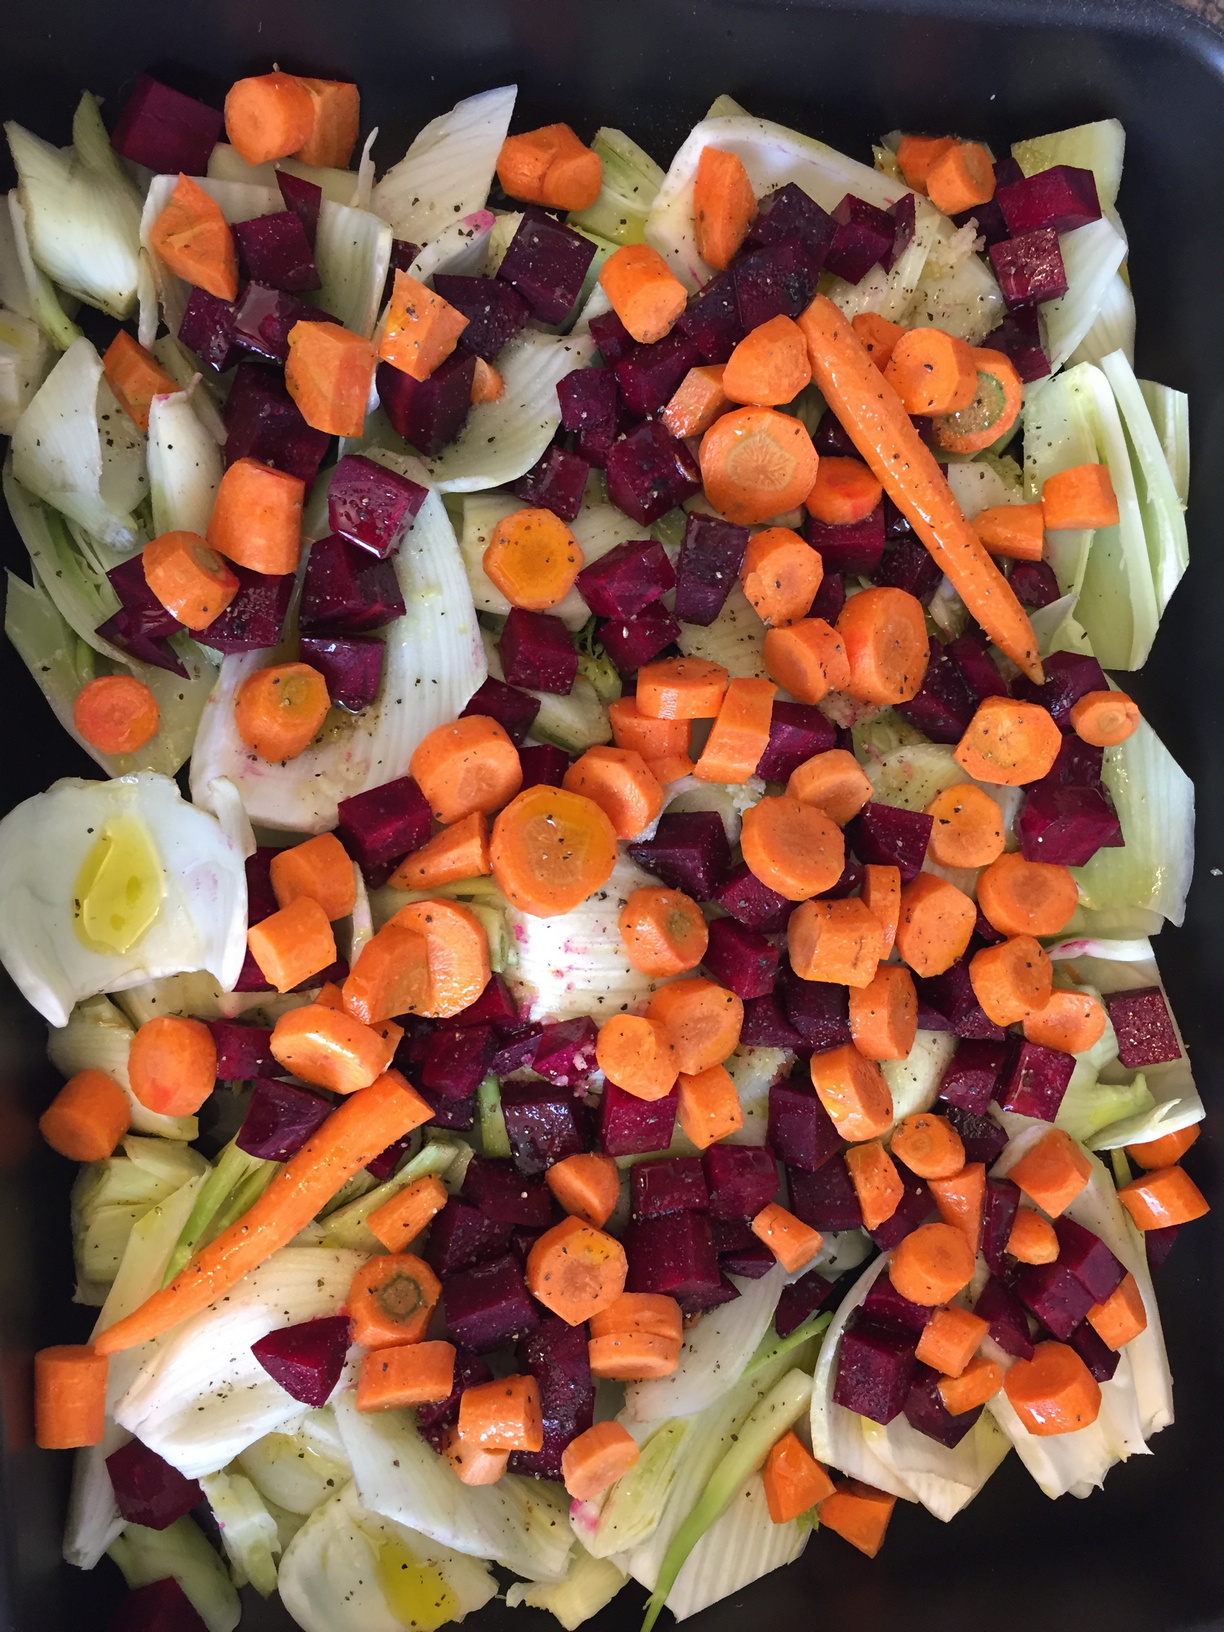 A vegetable bake with carrots, beetroot and fennel from the garden. A bit of salt, pepper and olive oil and it made a tasty accompaniment. The fennel could have been picked a little earlier as the inner core had gone a bit woody and some of the outer stems were a bit tough, but overall it was a success.